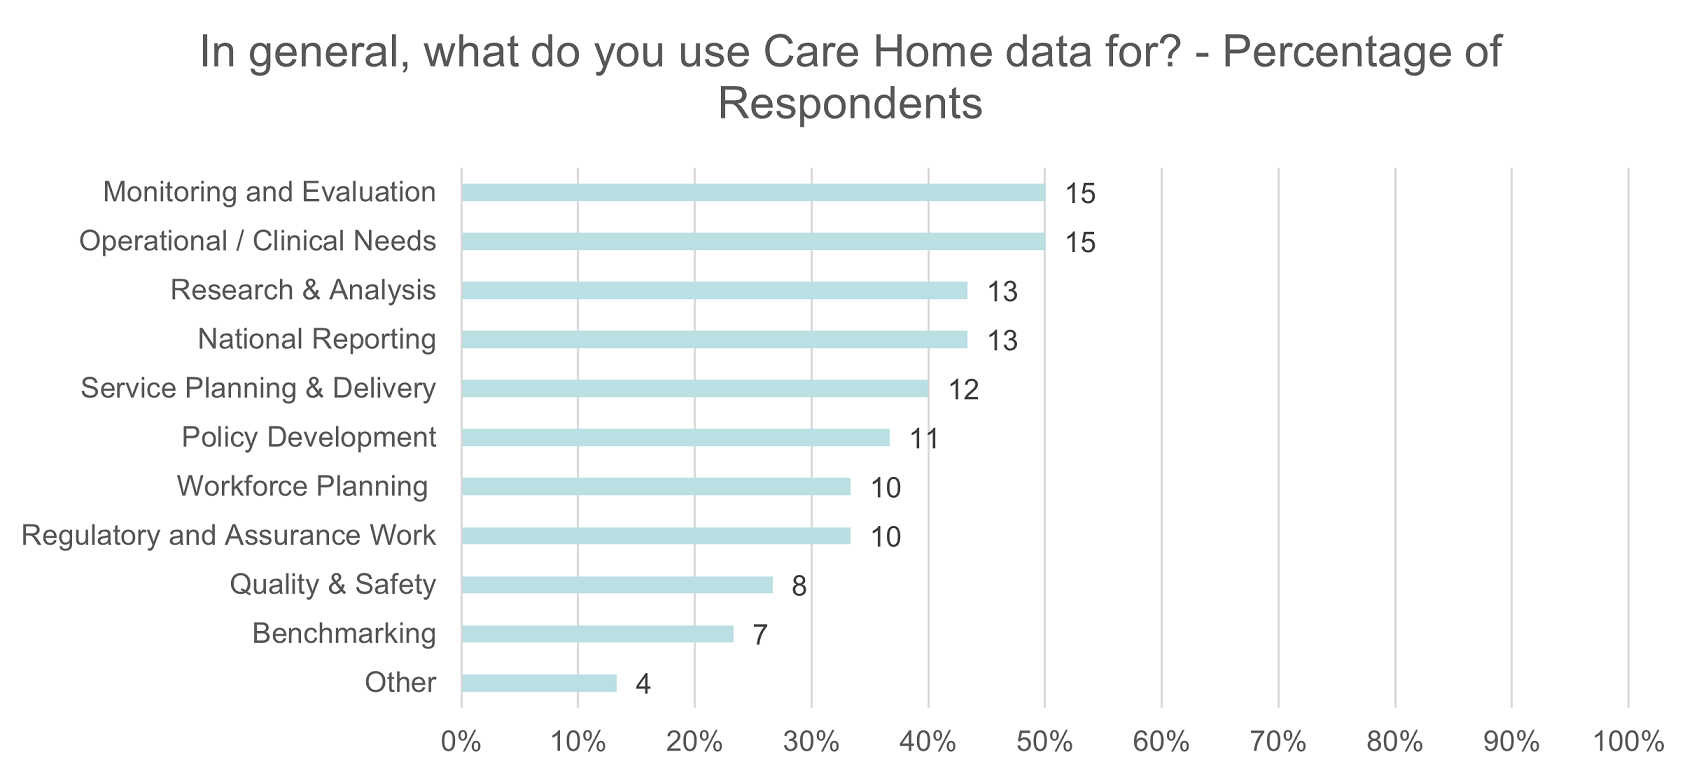 This chart shows the general reasons that the respondents used the Care Home Data for. It shows the percentage of respondents and the raw number of responses next to each row. The results are as follows Monitoring and Evaluation 15, Operational / Clinical Needs 15, Research and Analysis 13, National Reporting 13, Service Planning and Delivery 12, Policy Development 11, Workforce Planning 10, Regulatory and Assurance Work 10, Quality and Safety 8, Benchmarking 7, Other 4.